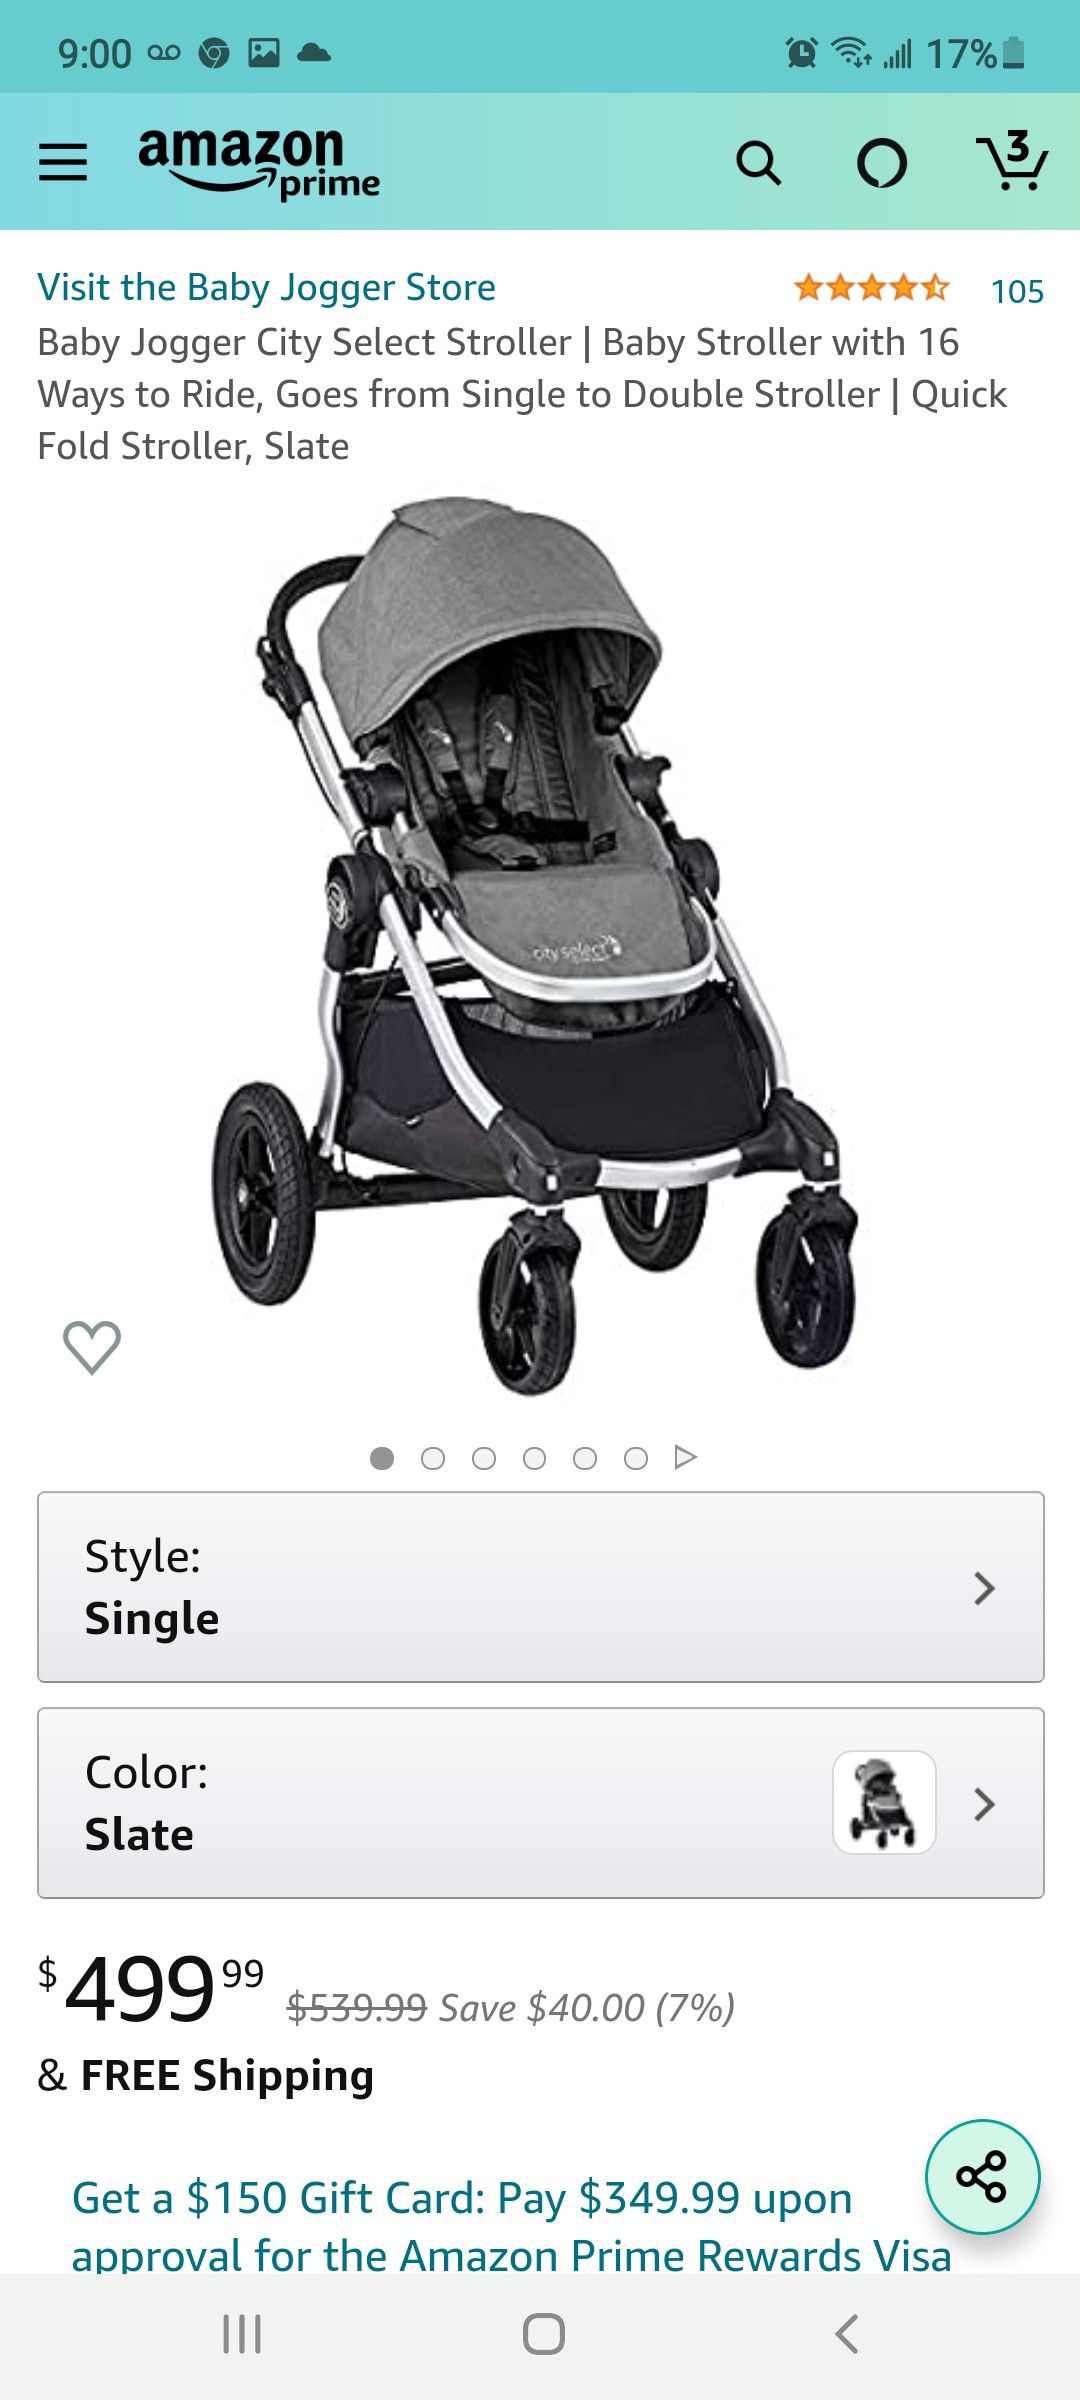 Baby Jogger City Select Stroller | Baby Stroller with 16 Ways to Ride, Goes from Single to Double Stroller | Quick Fold Stroller, Slate